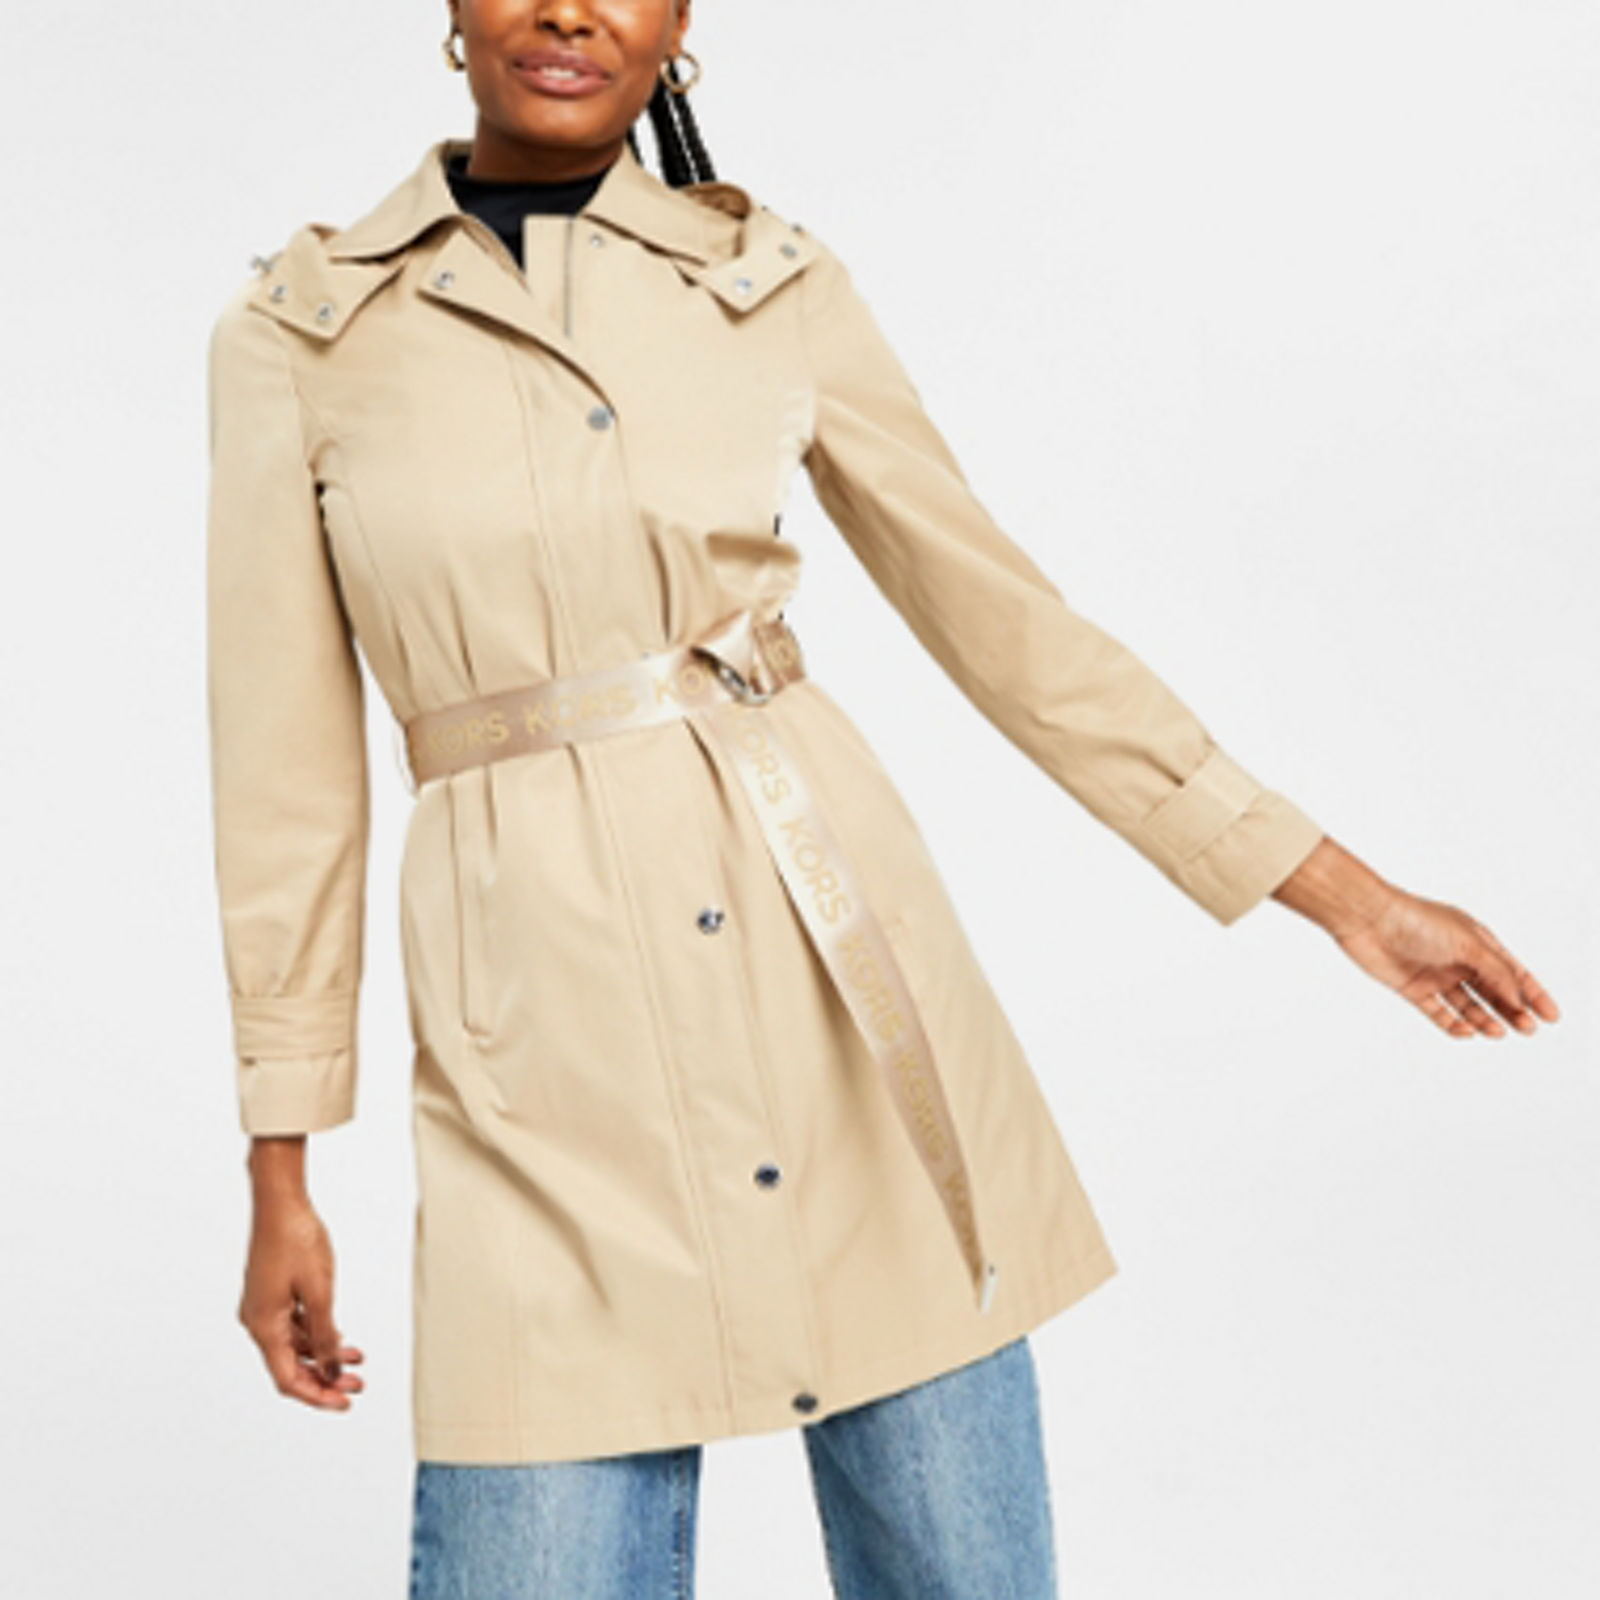 BCBGeneration Women's Petite Faux-Leather Belted Trench Coat - Macy's